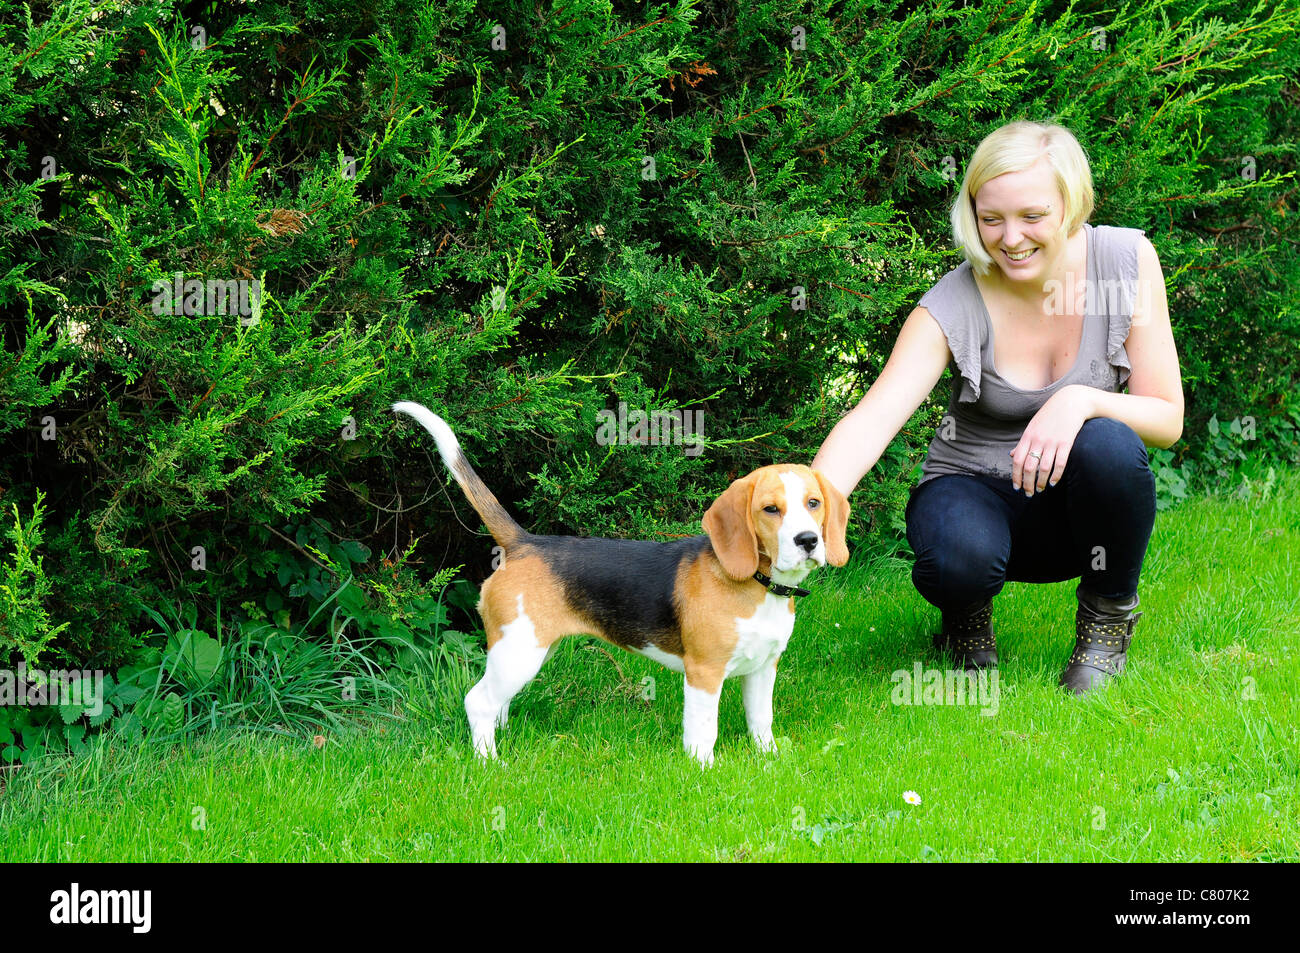 Young woman playing with her pet Beagle puppy dog. Stock Photo